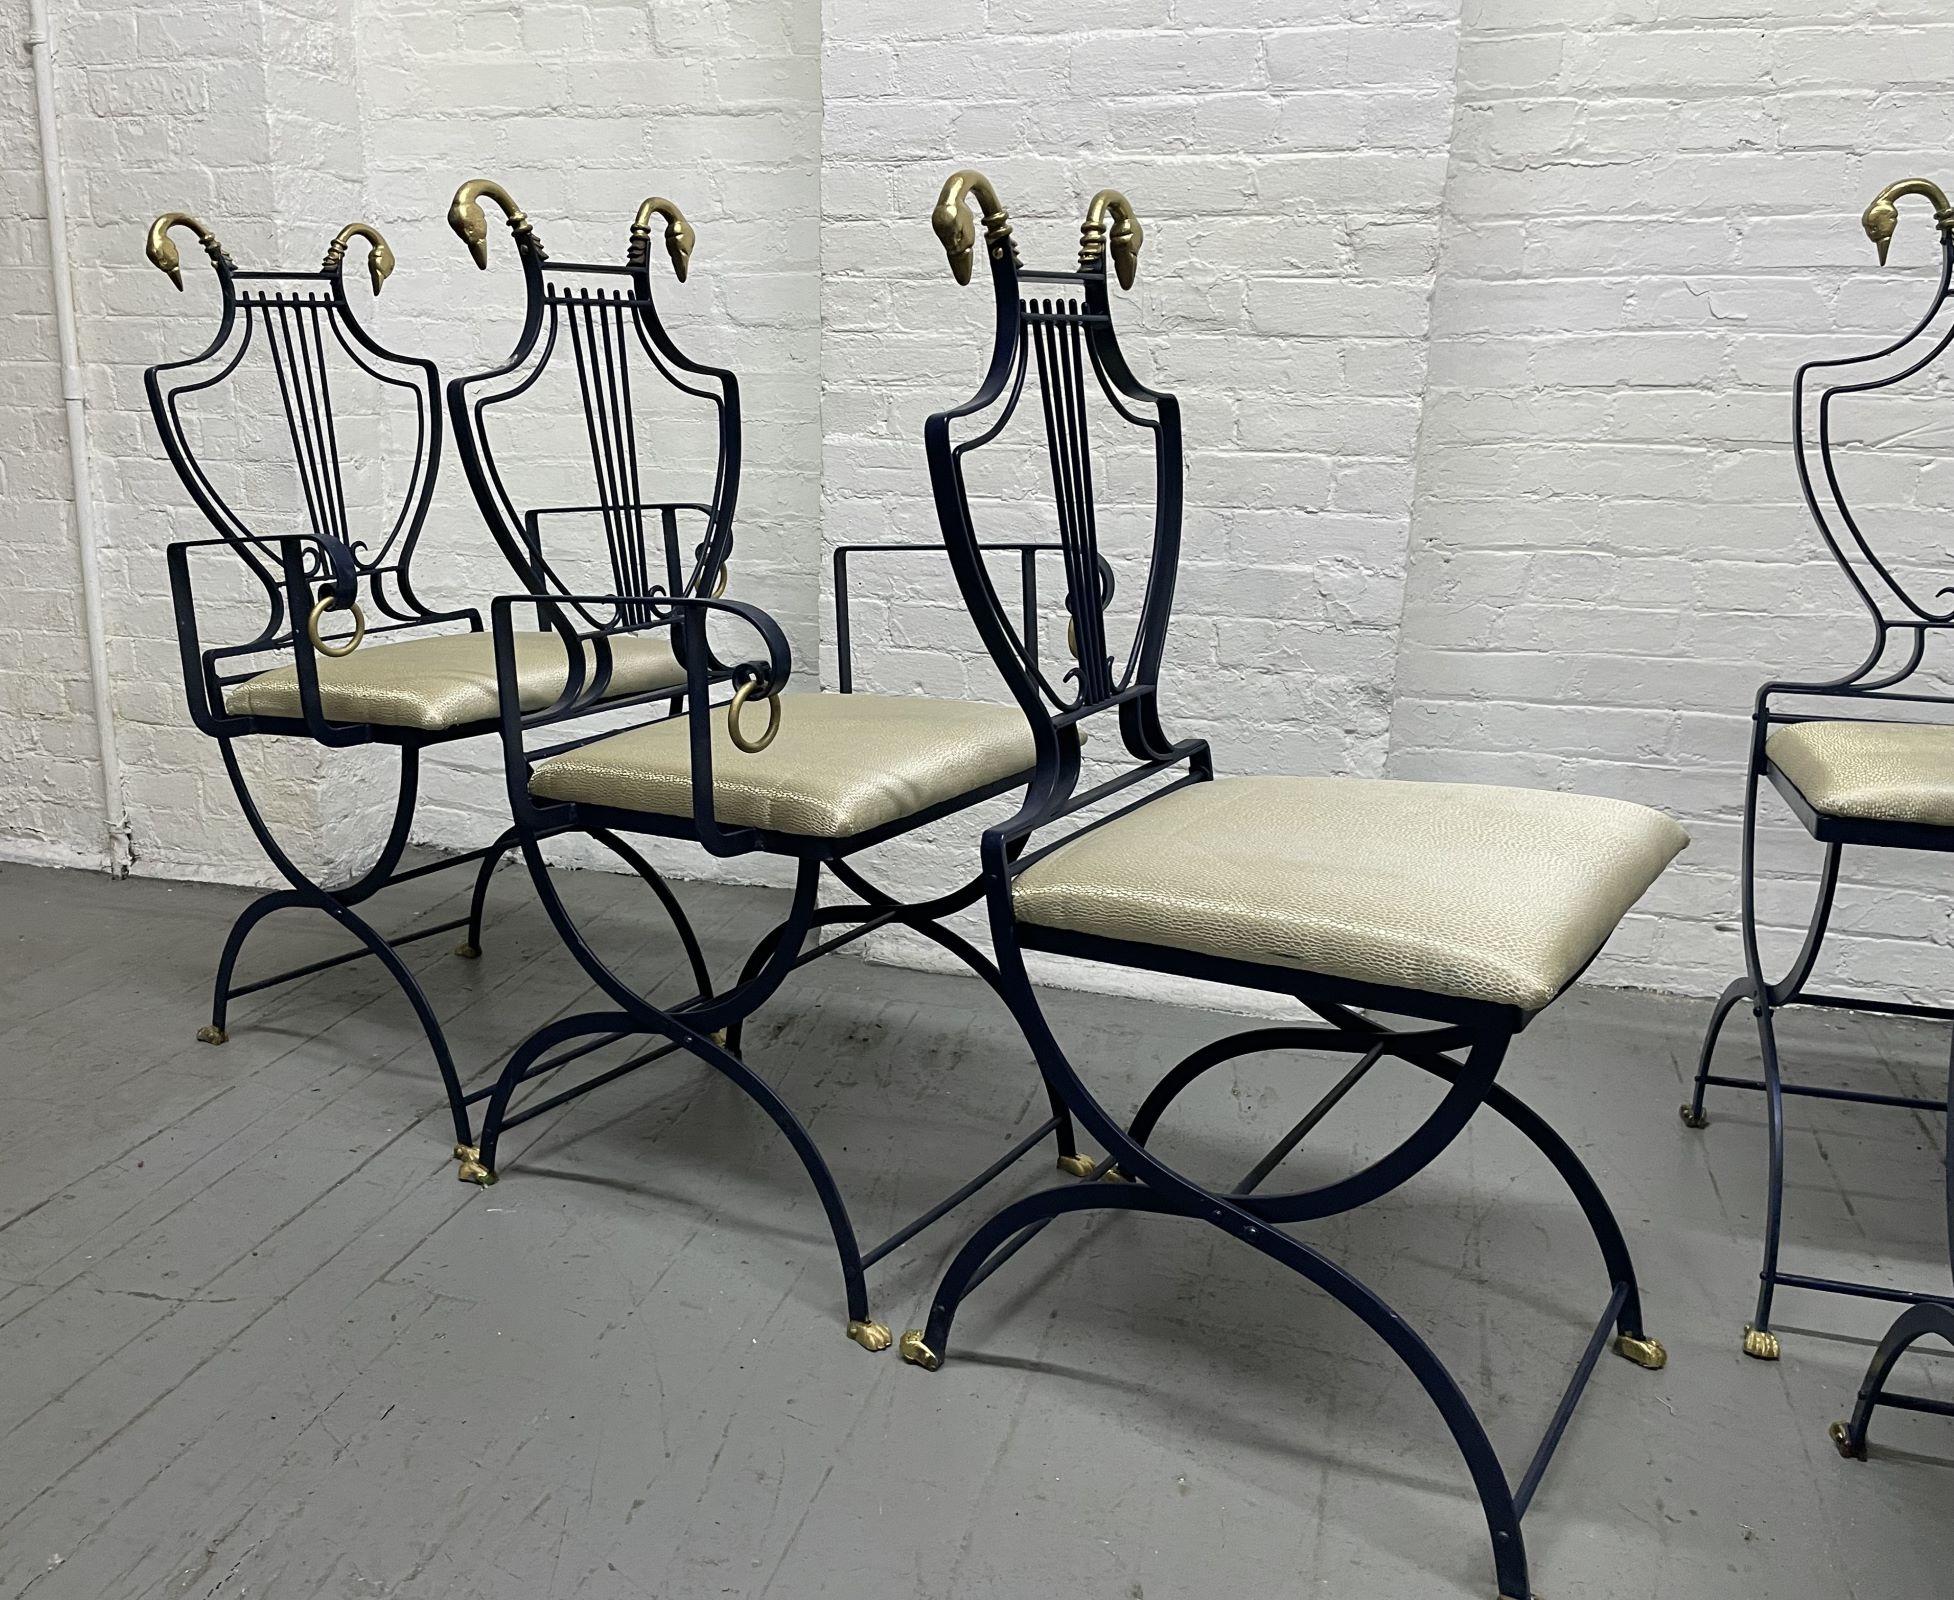 Set of 6 Maison Jansen Swan and Lyre Back Chairs.  The folding chairs have brass swans to the top on each side.  The frames of the chairs are dark blue with claw feet.  Two of the chairs have arms.  The chairs can also be used as dining chairs.